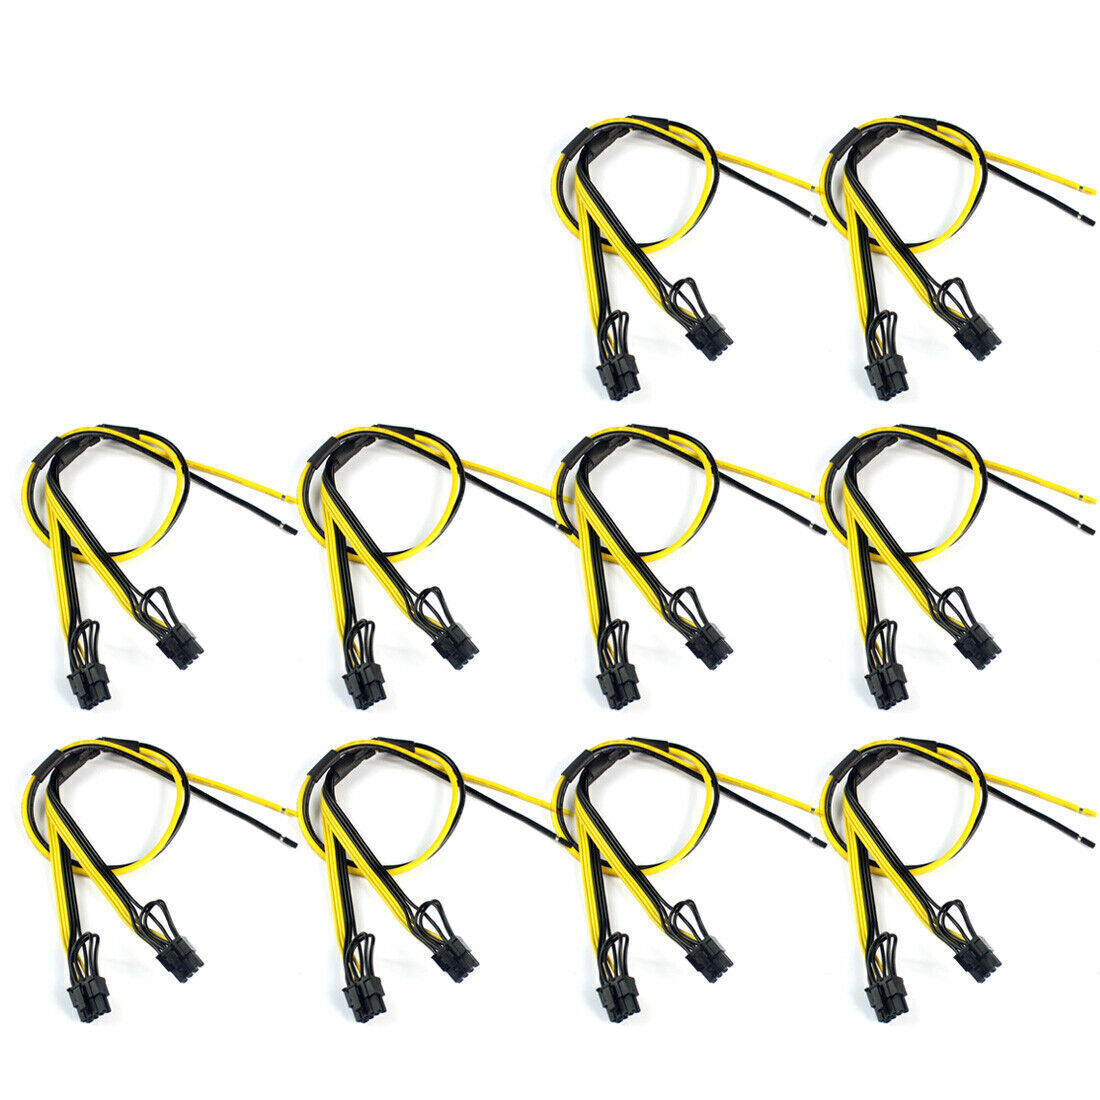 5/10Pcs Dual PCIe PCI-E Graphic Video Card 8pin 6+2pin Power Cable for Miner